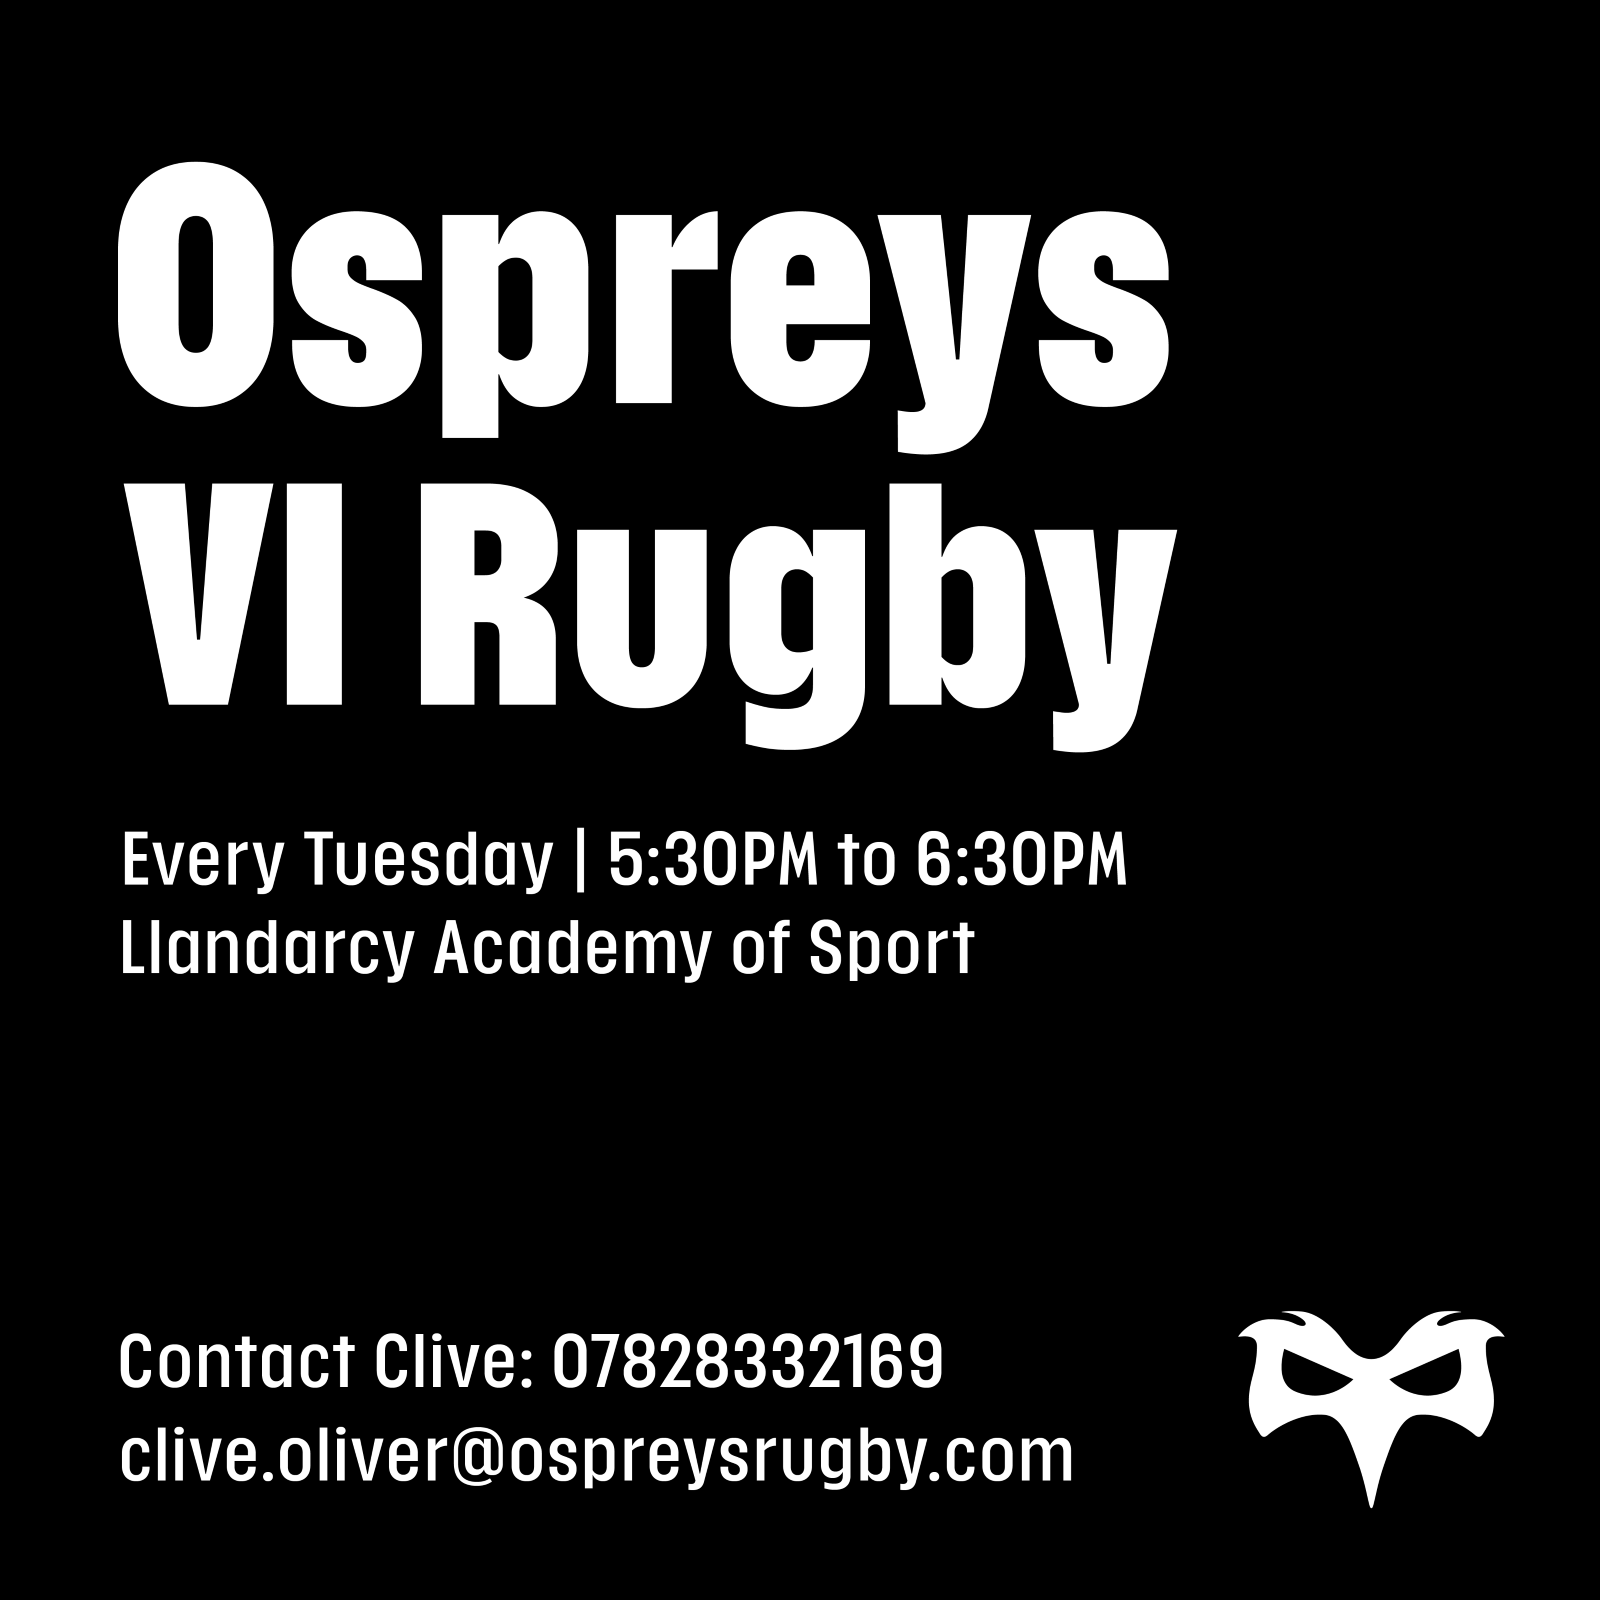 Ospreys VI Rugby. Tuesday 5:30 to 6:30 at Llandarcy Academy of Sport. Contact Clive on clive.oliver@ospreysrugby.com or call 07828332169